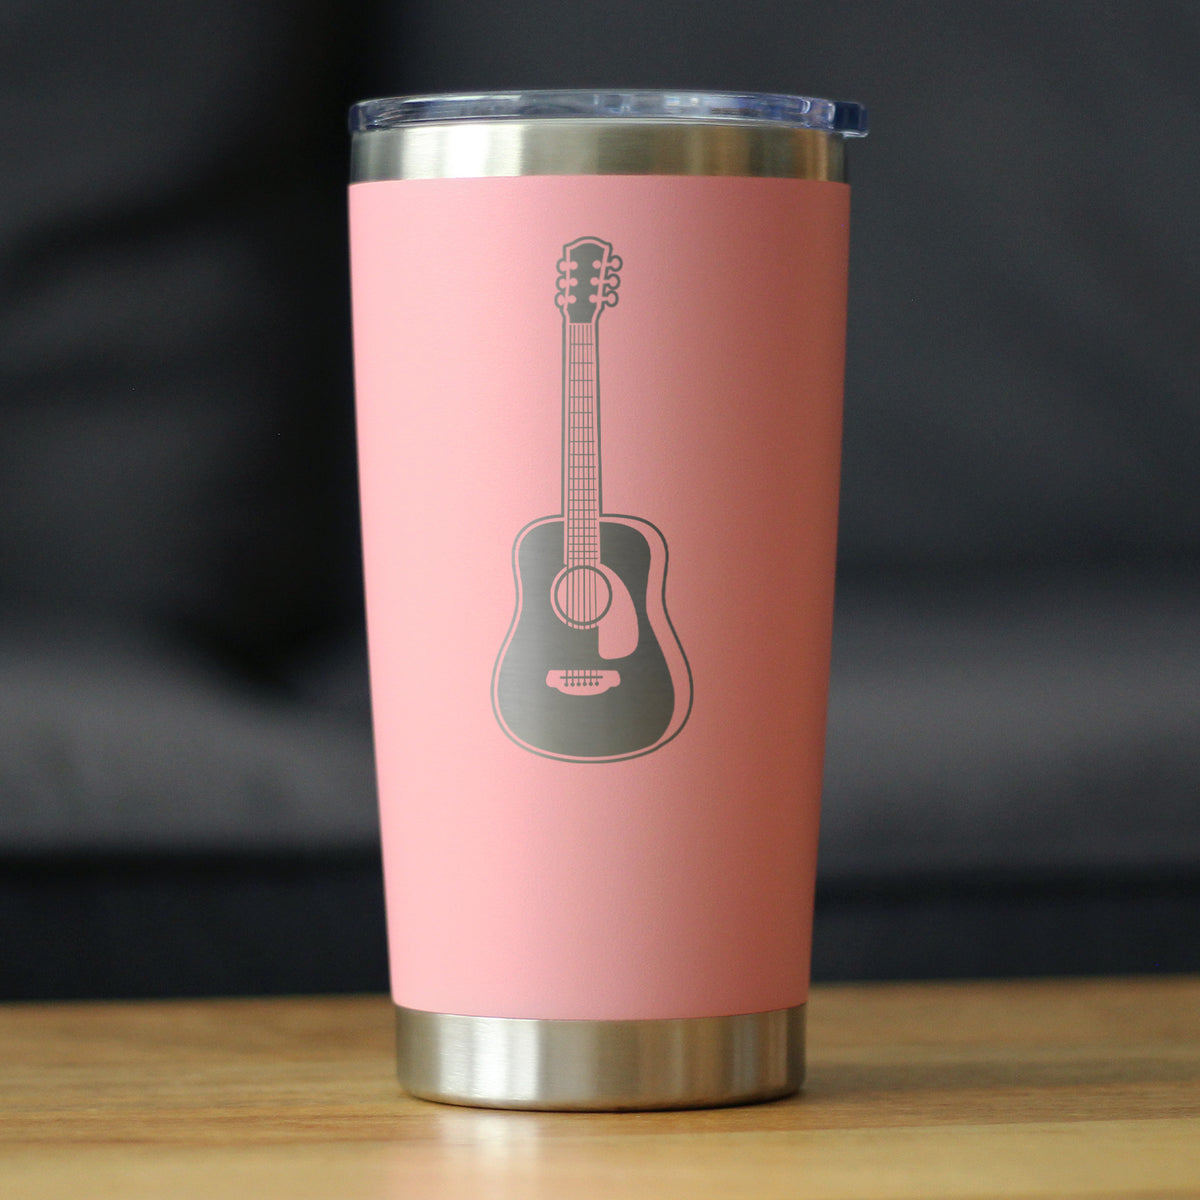 Acoustic Guitar - Insulated Coffee Tumbler Cup with Sliding Lid - Stainless Steel Travel Mug - Guitarist Gifts for Women and Men Musicians